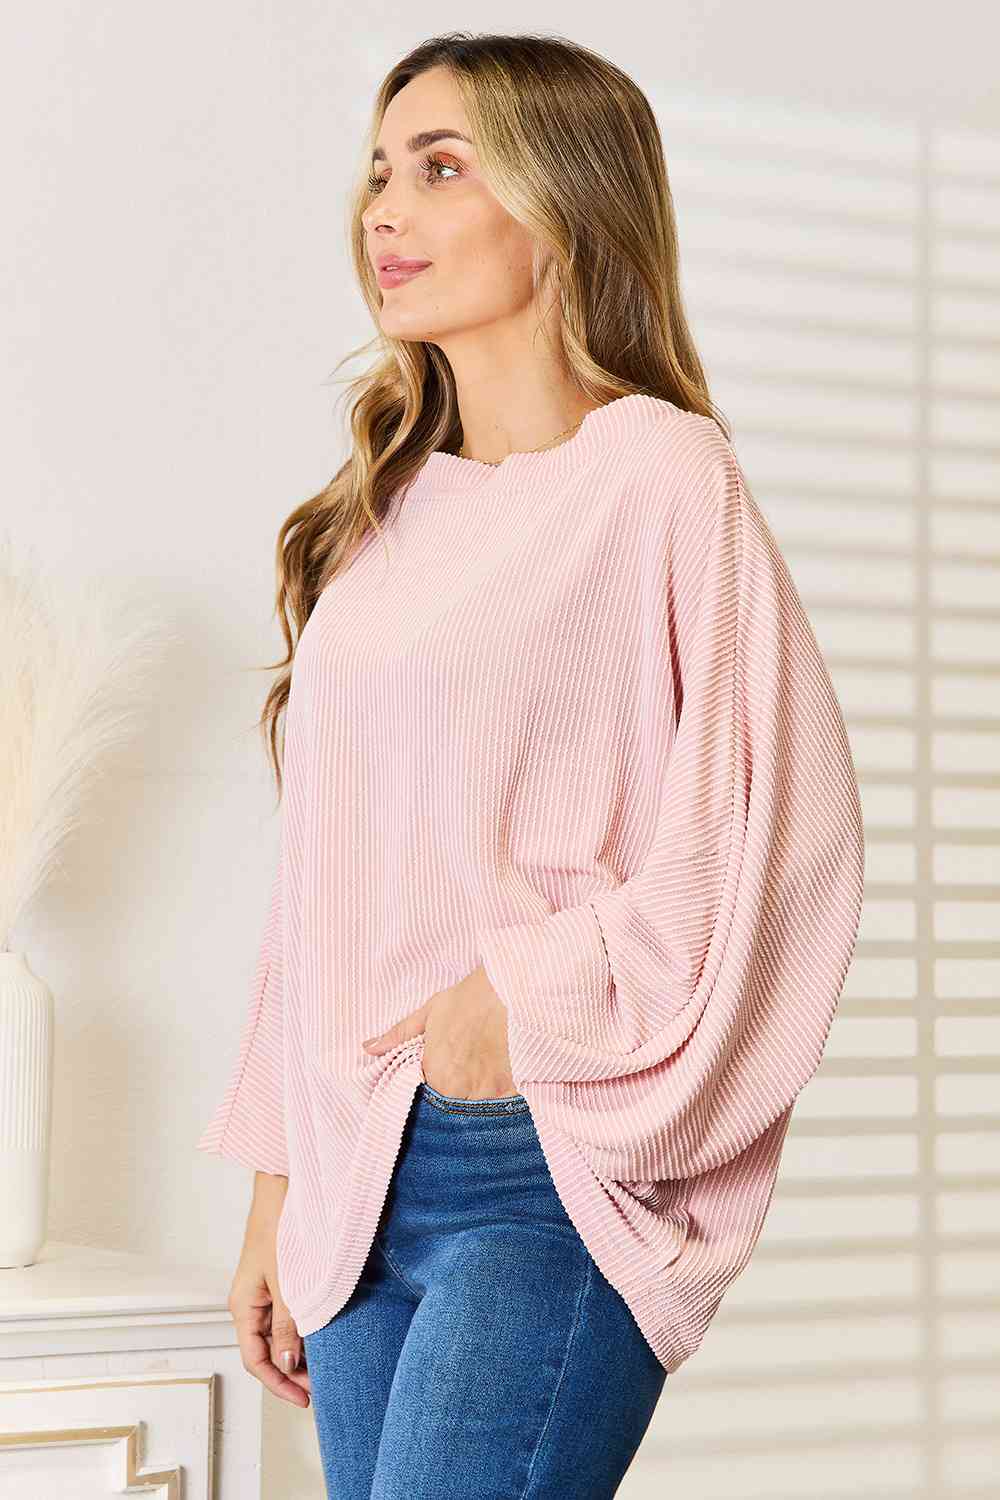 Ribbed Long Sleeve Top - Women’s Clothing & Accessories - Shirts & Tops - 3 - 2024